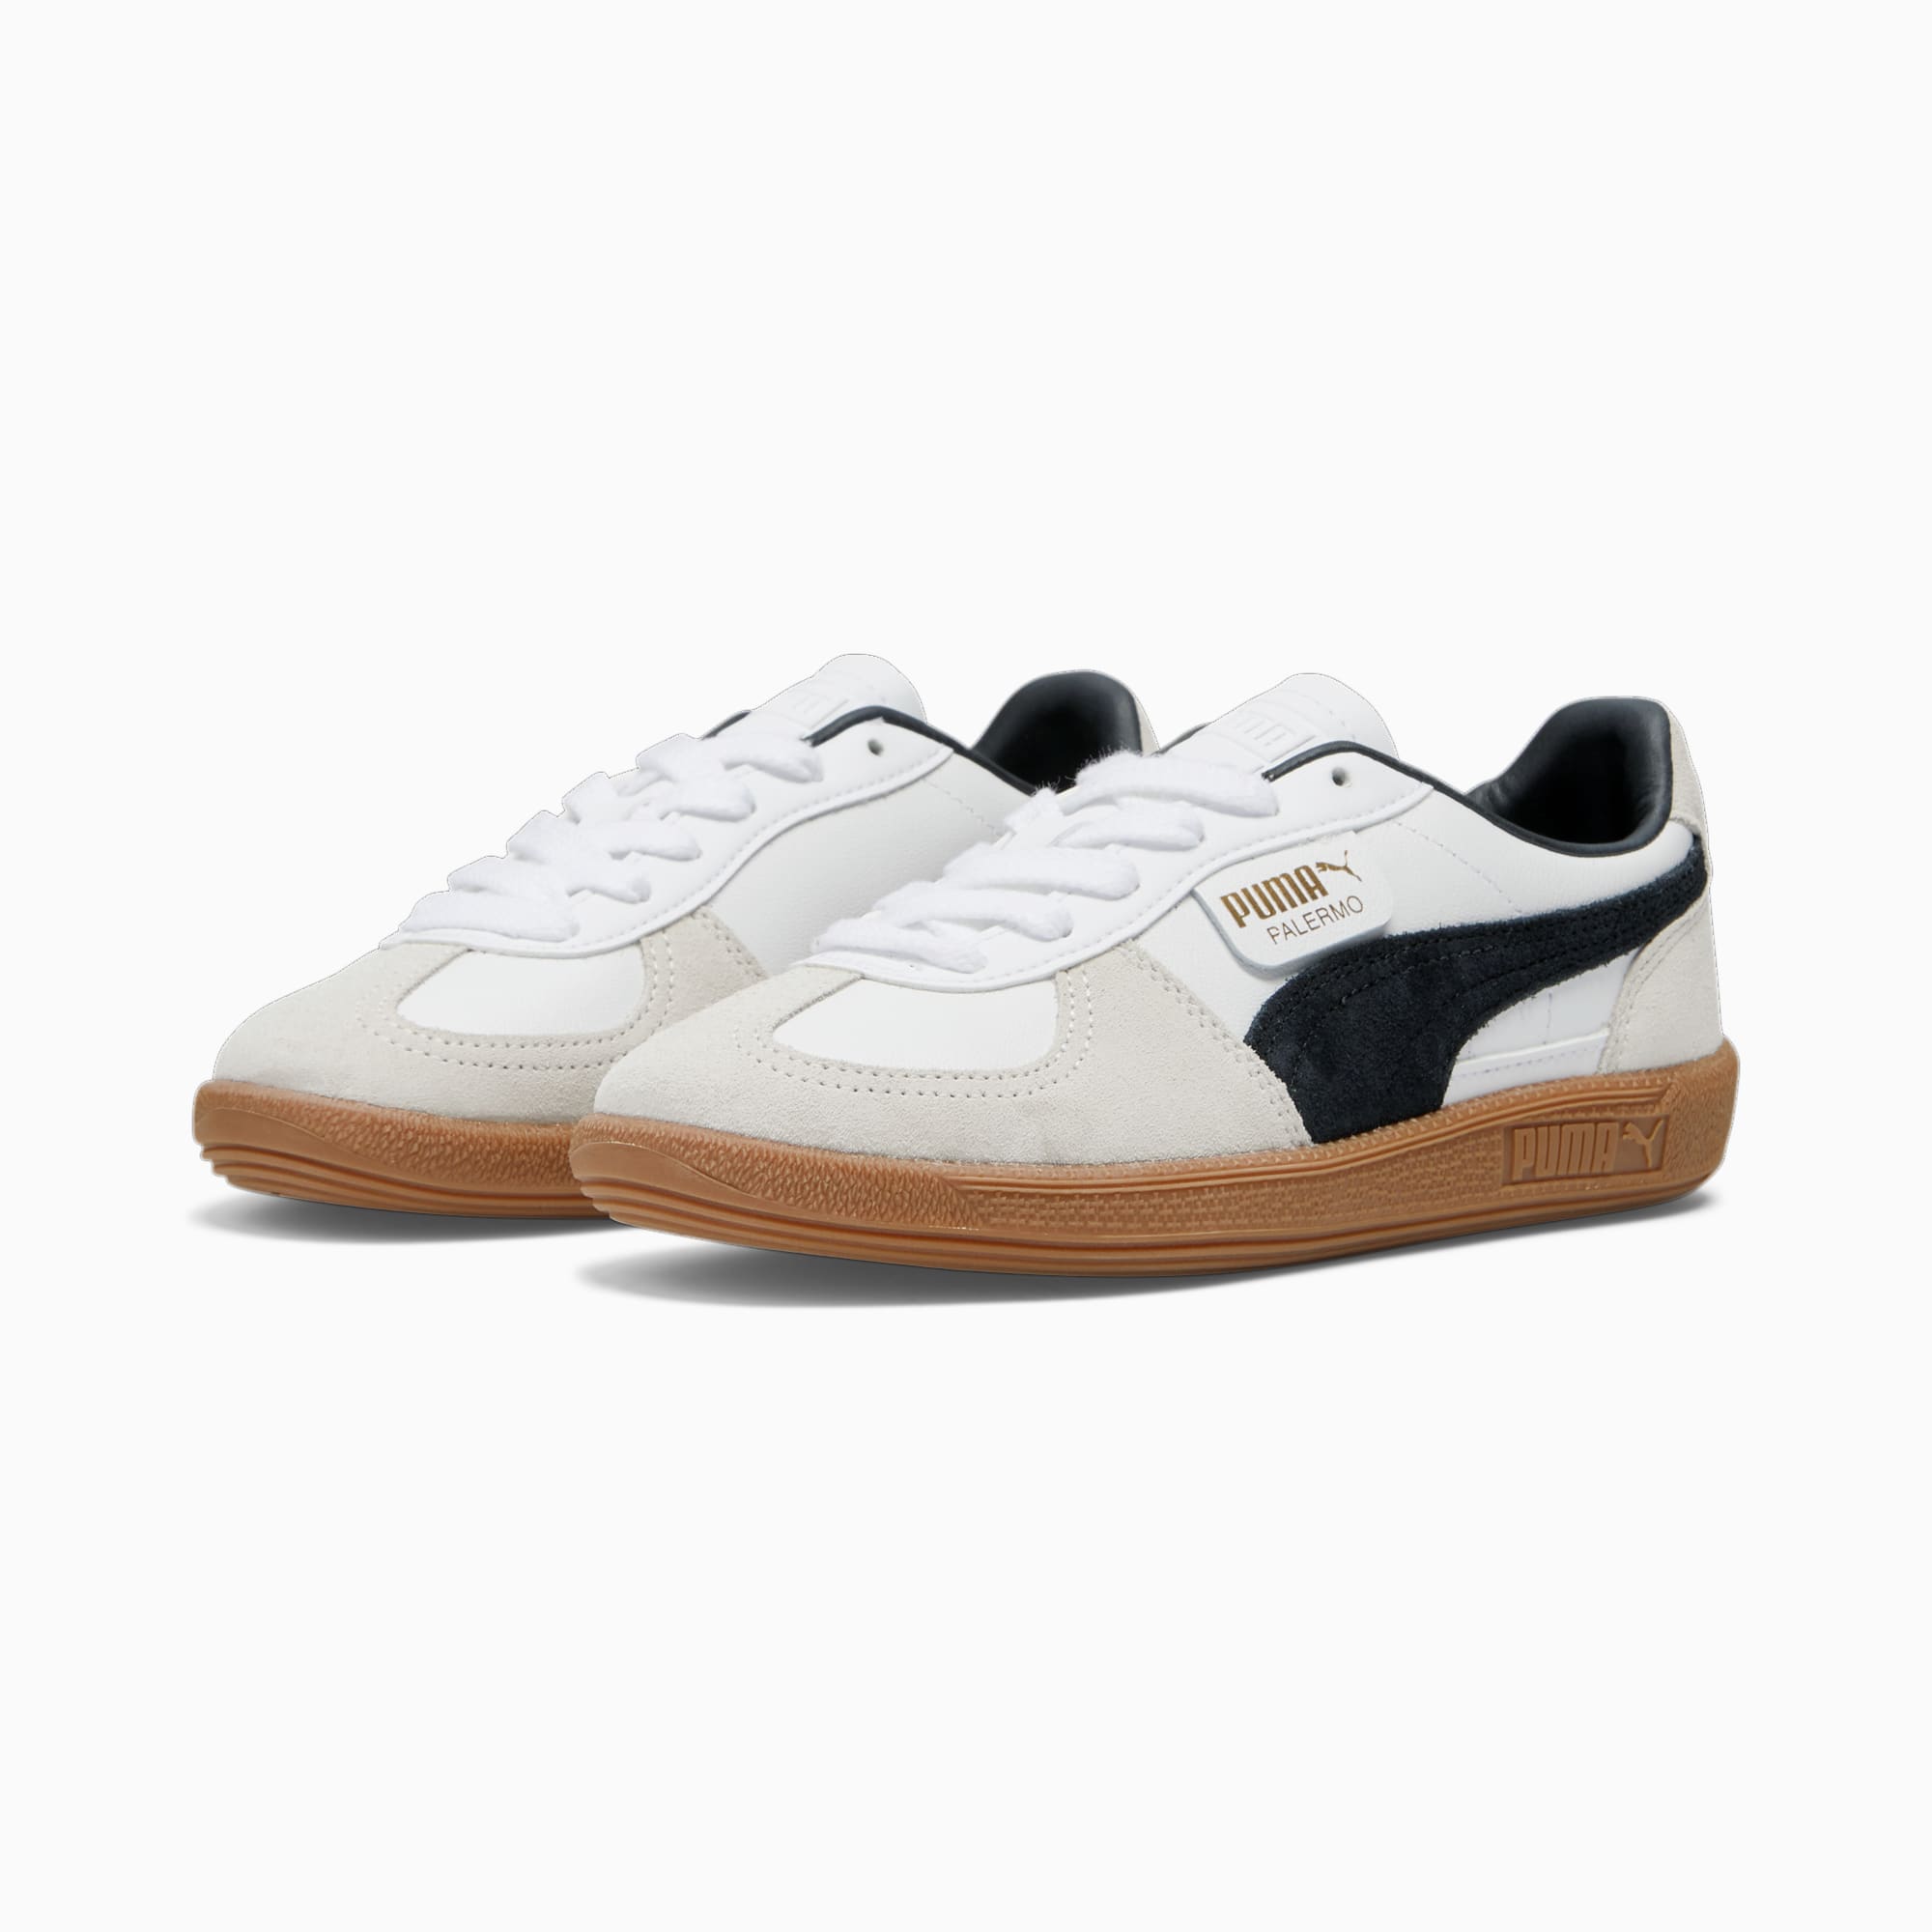 Palermo Women's Leather Sneakers